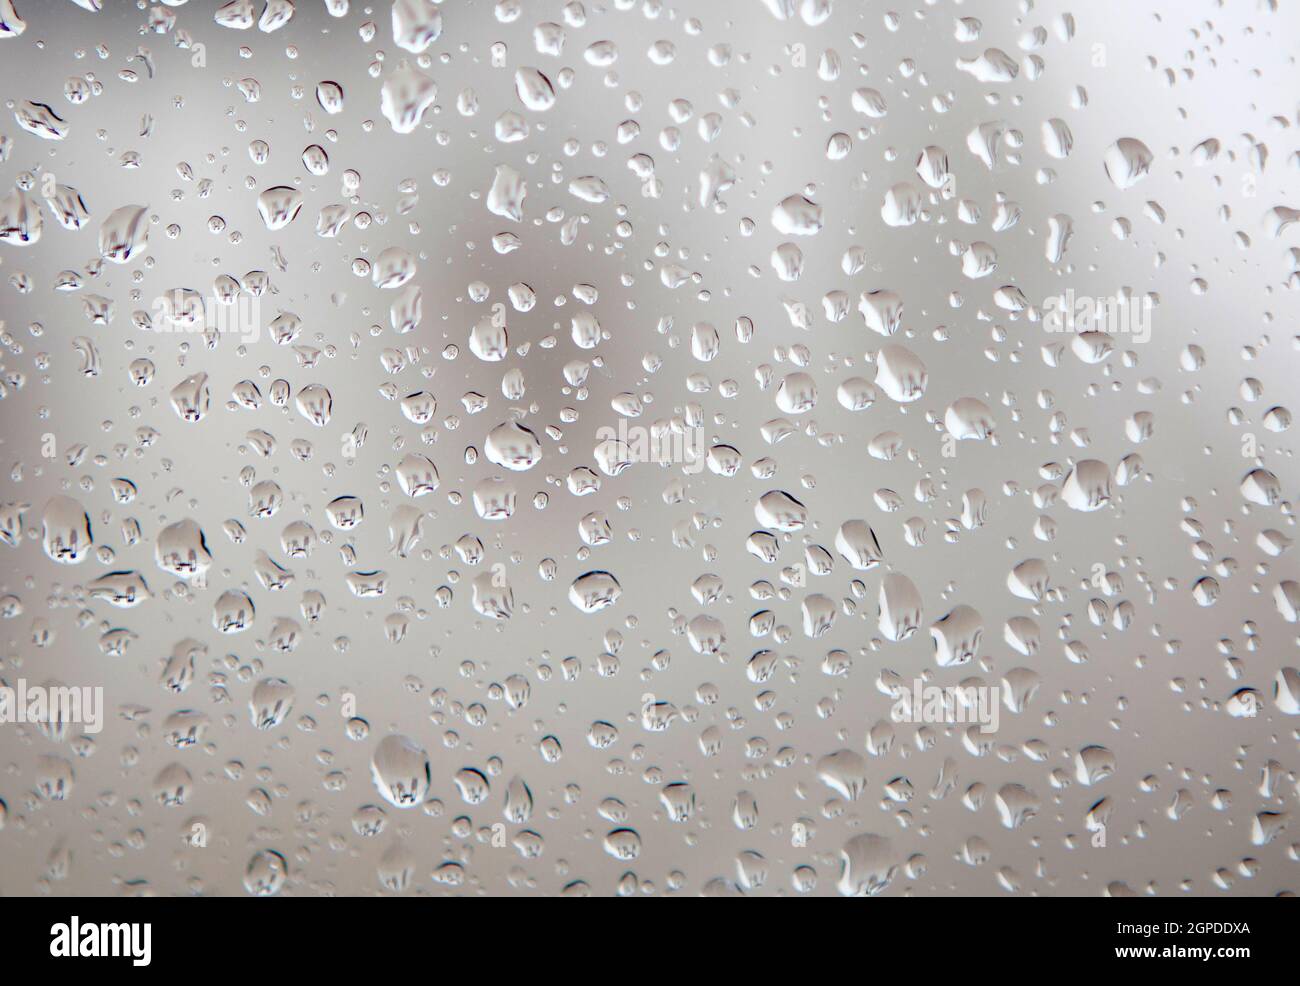 Glass with drops of rain water close up Stock Photo